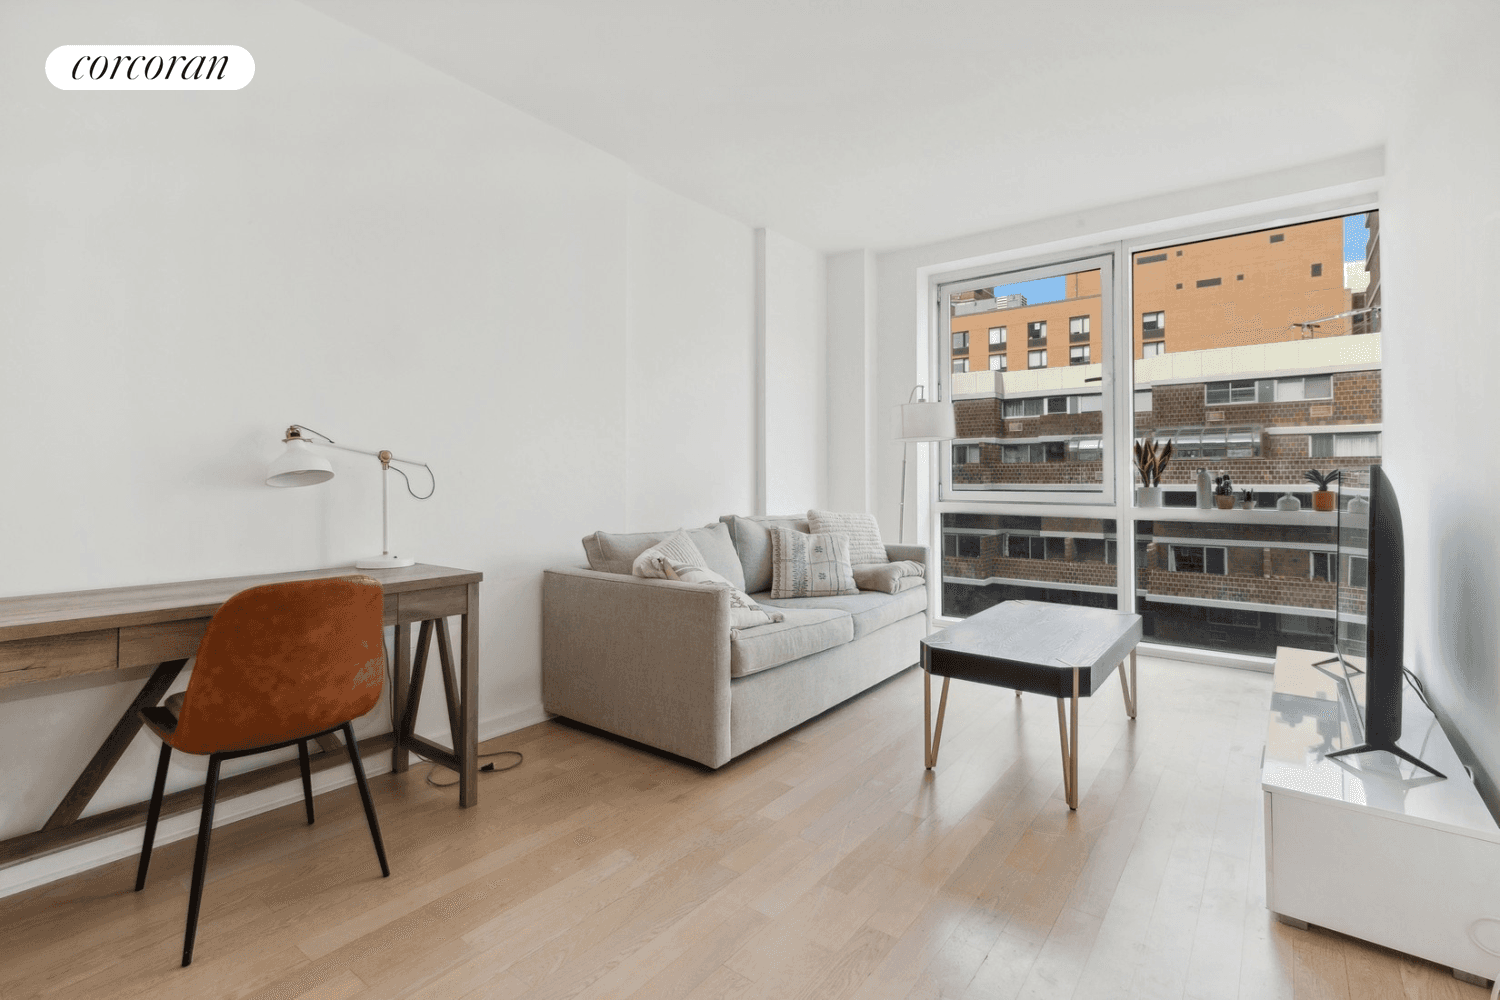 Indulge in urban luxury living with this stunning one bedroom, one bathroom home featuring floor to ceiling windows.